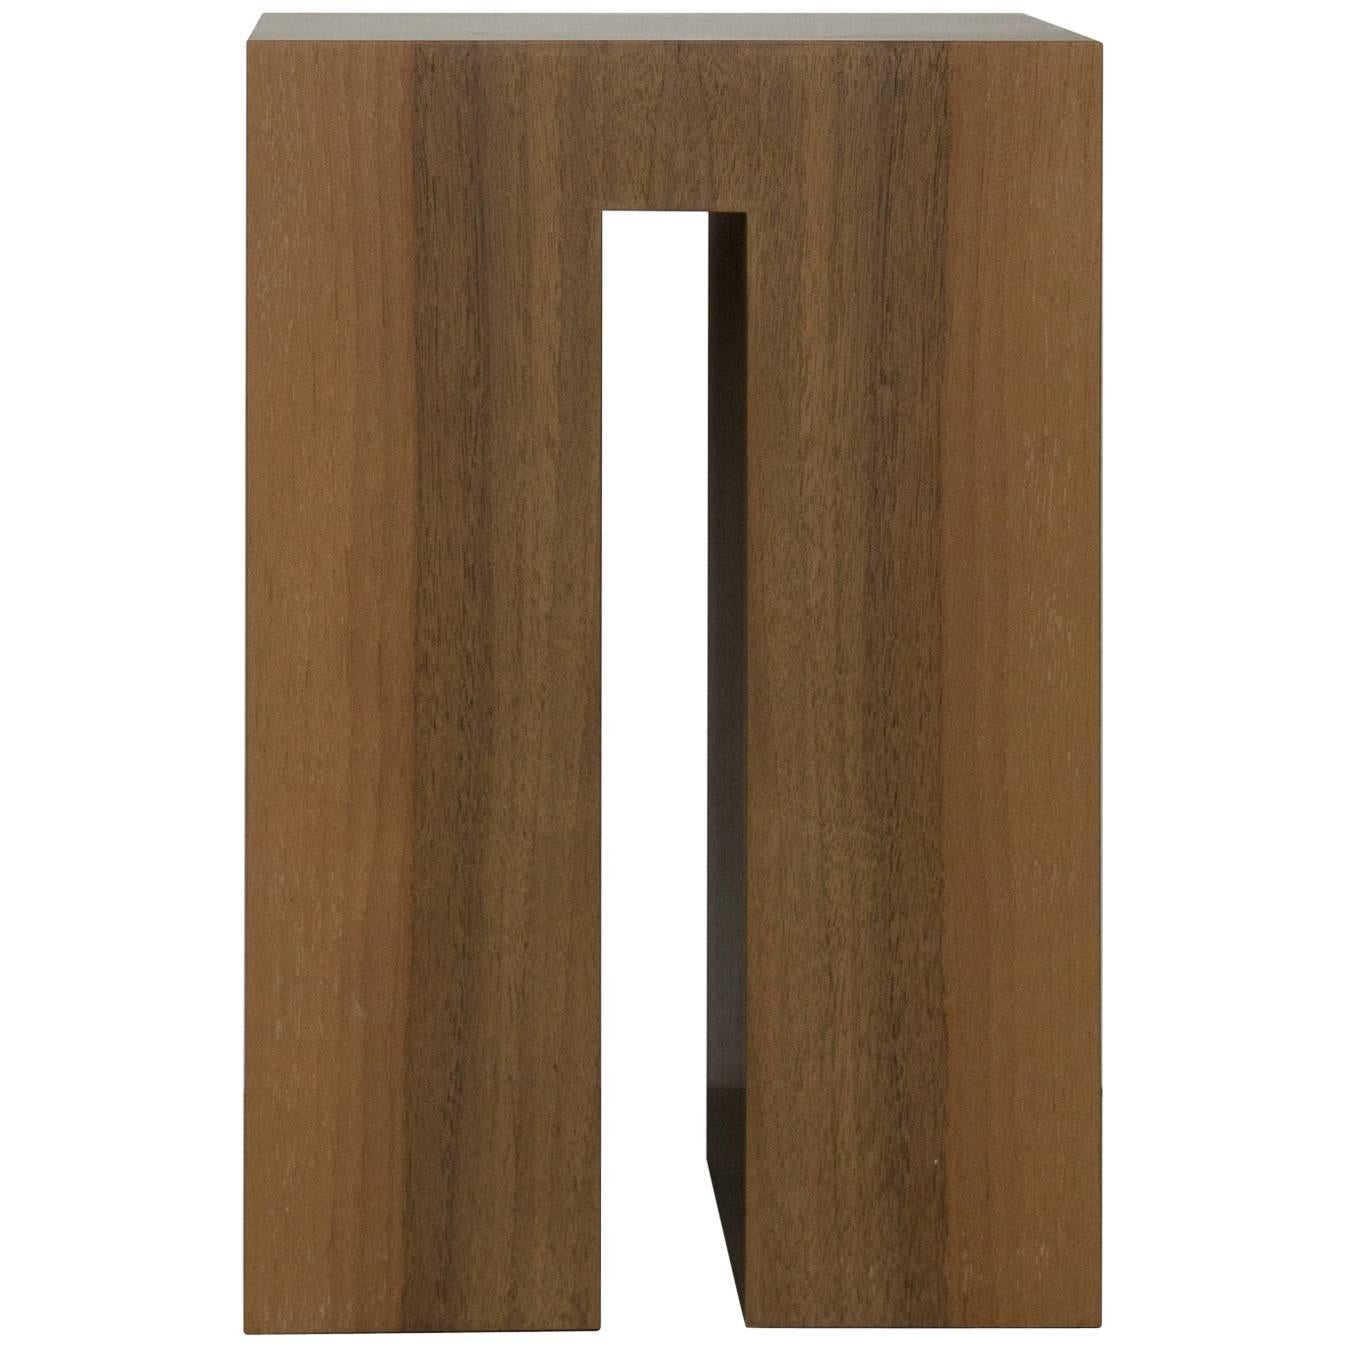 "Kyo-Co" Veneered Plywood Stool Designed by Nathalie Orlandi for Dessie' For Sale